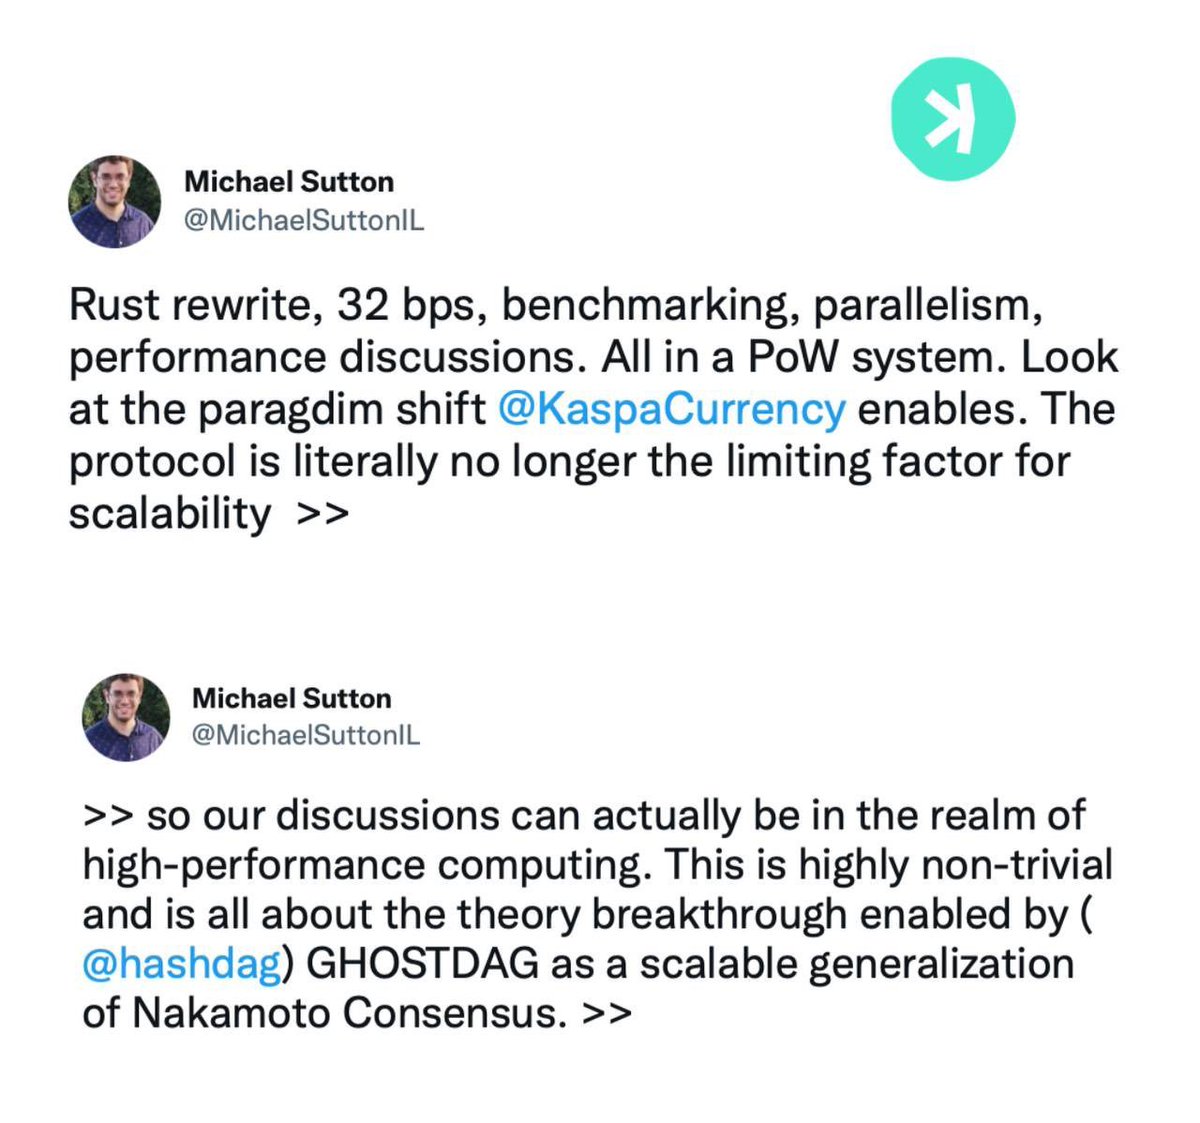 The “Paradigm shift” In $kas @KaspaCurrency, the protocol is no longer the limiting factor for scalability. discussions can be in the realm of high performance computing #bitcoin/#litecoin/PoW maxis, eyes on #kaspa $doge $dash $btc $ltc #ltc $xmr $eth $cfx $etc $bch $bsv $ckb